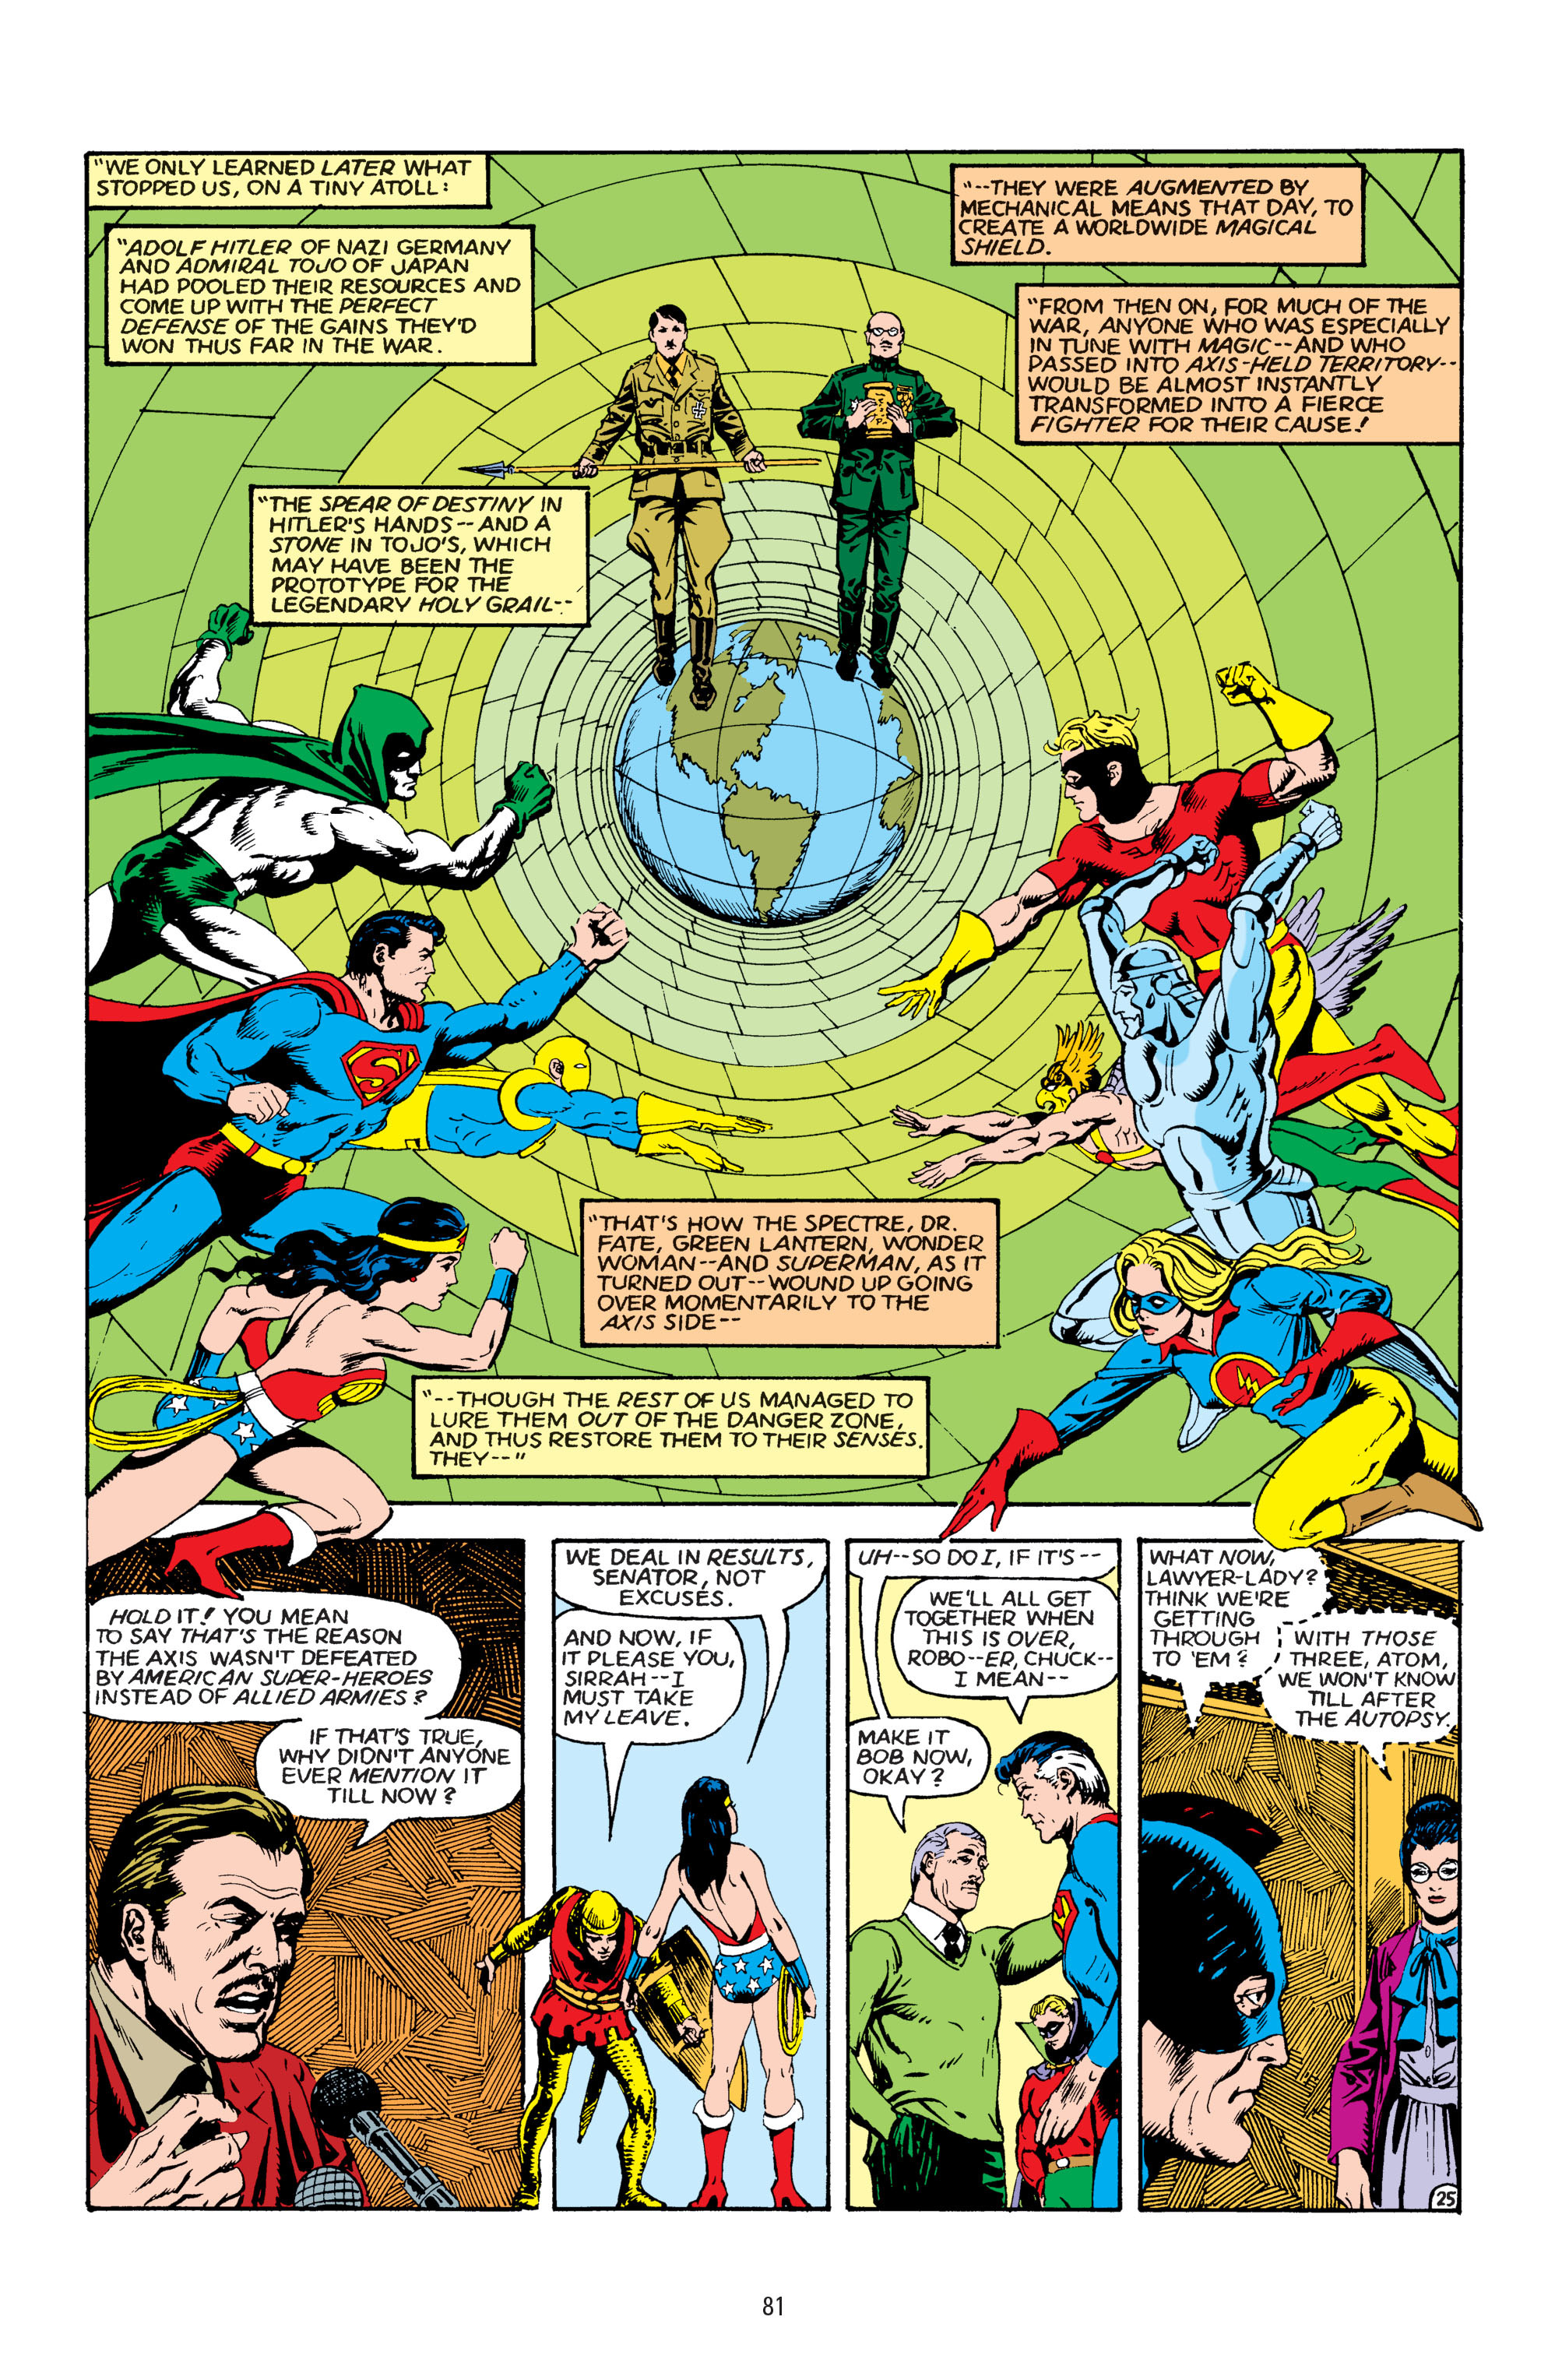 Read online America vs. the Justice Society comic -  Issue # TPB - 79